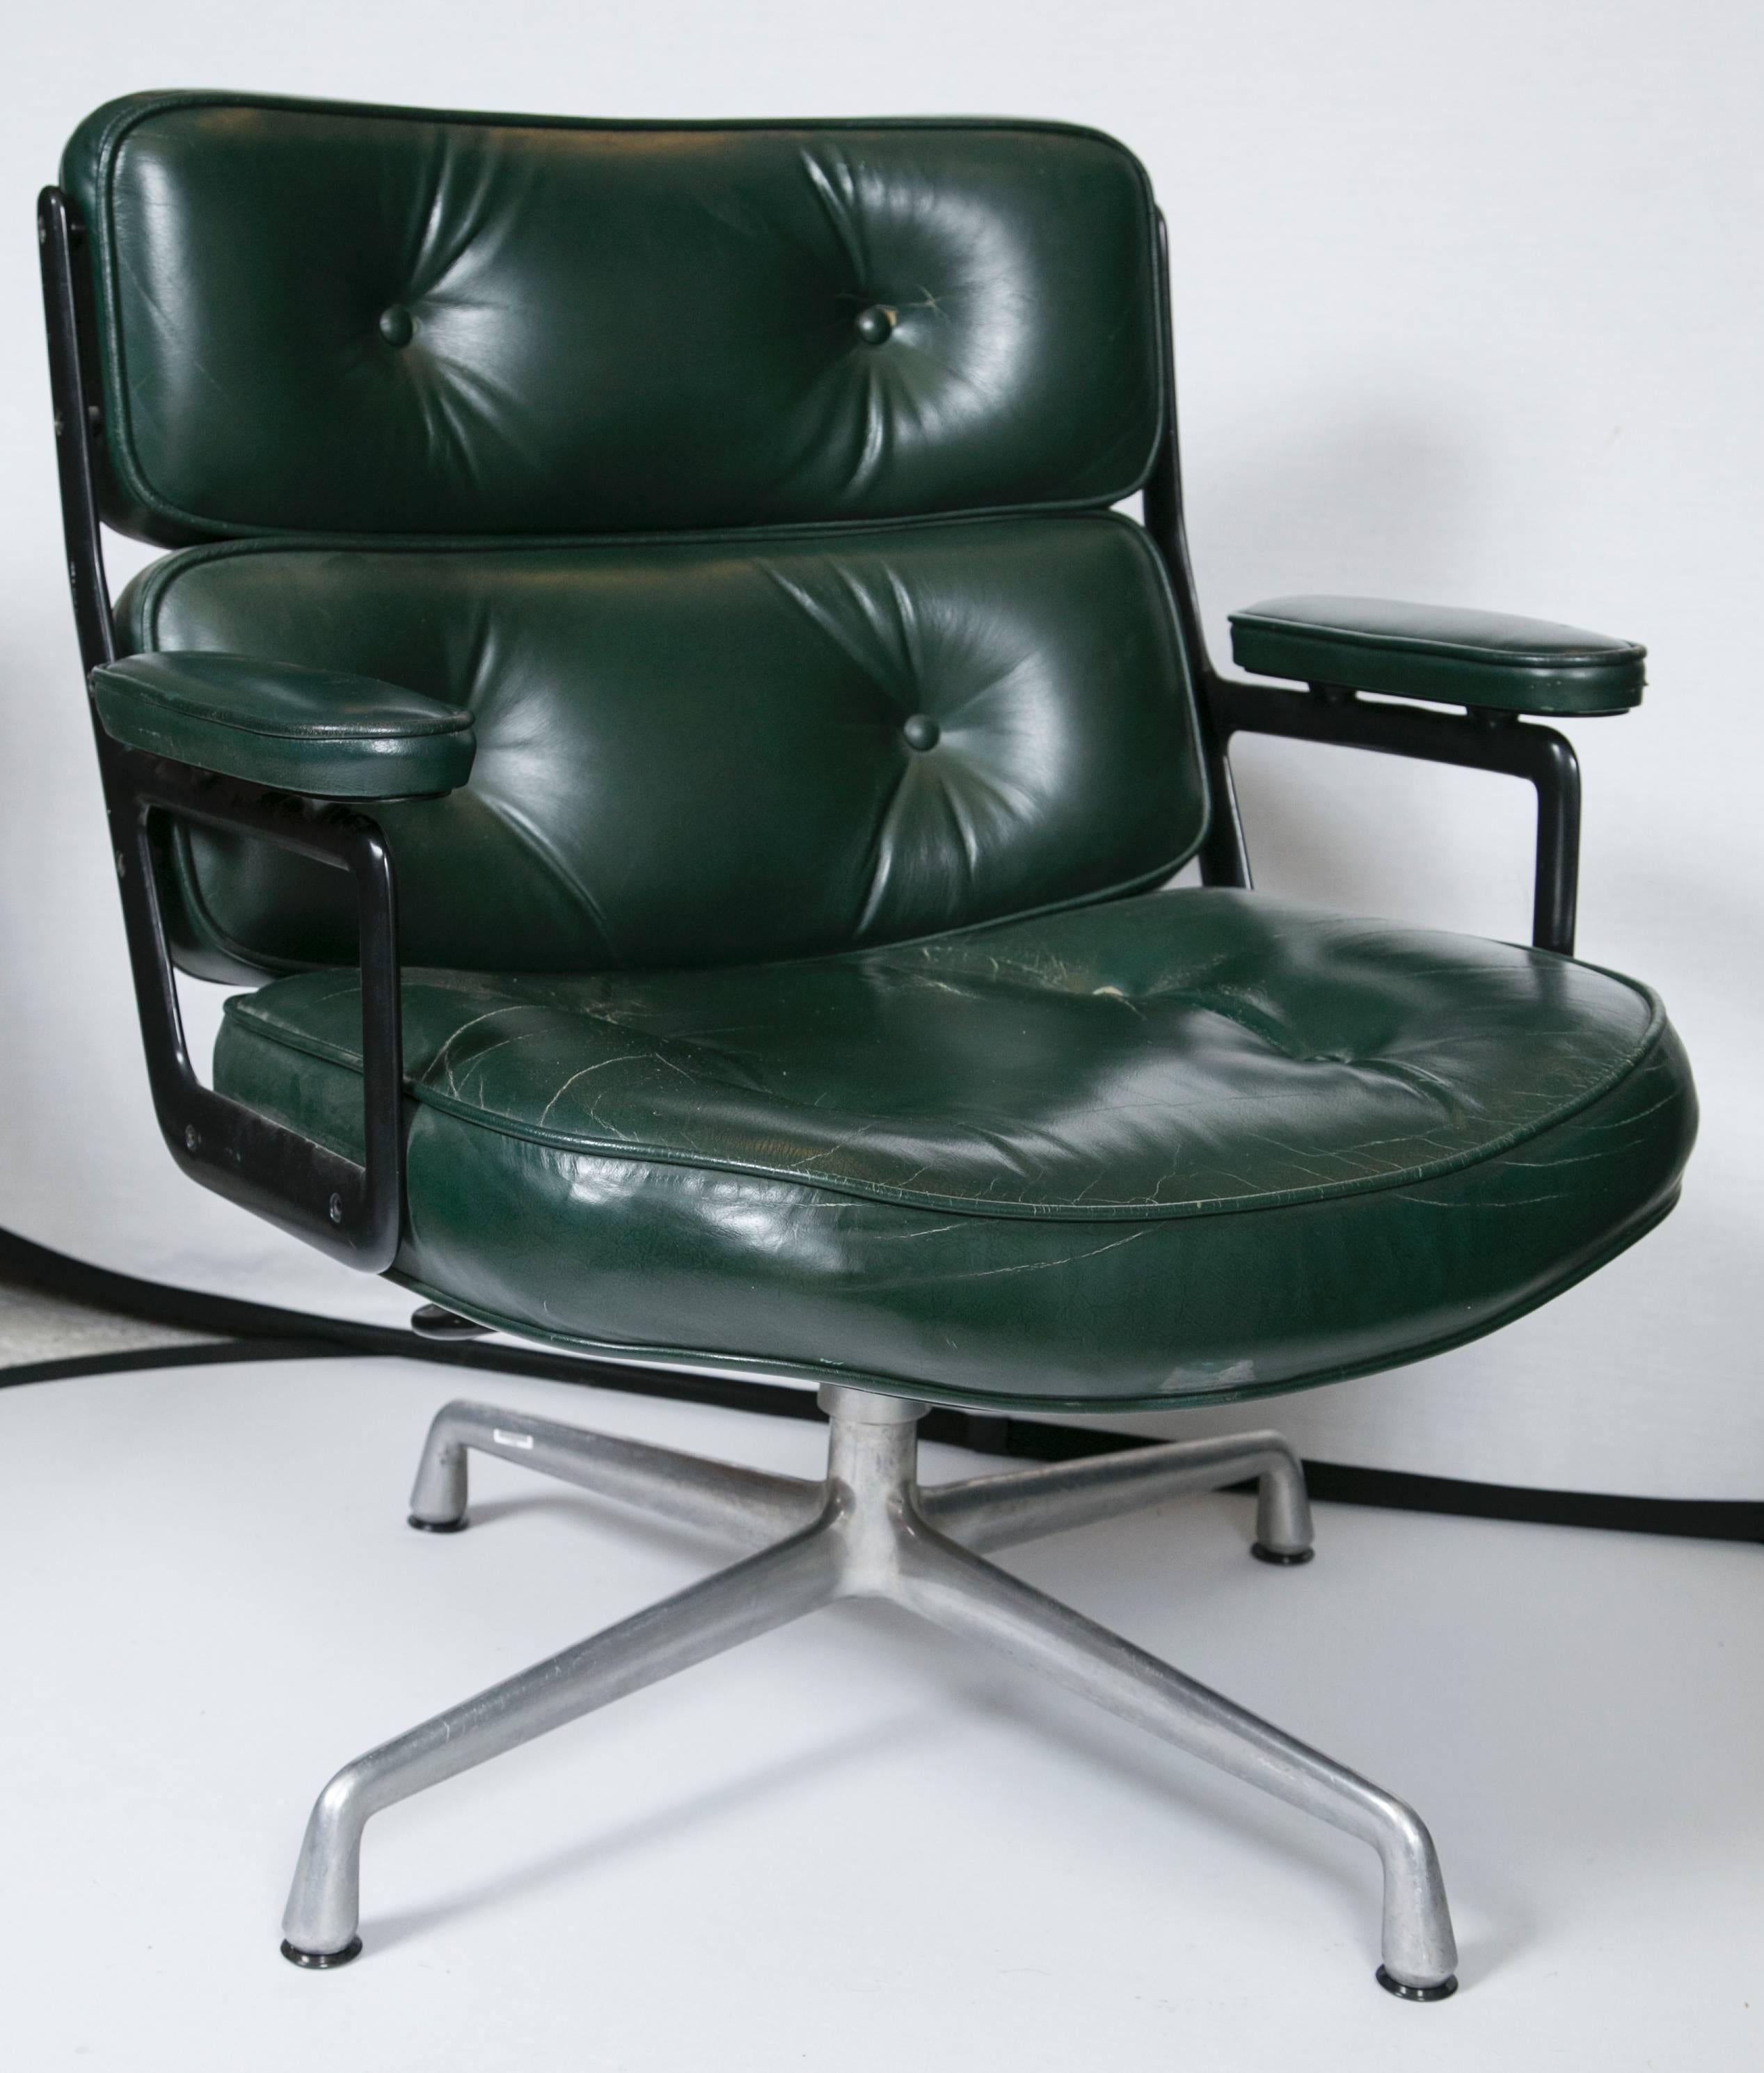 The epitome of executive seating from the Mid-Century, the Eames Executive chair makes the biggest statement. Take this for a spin and feel like Don Draper, while having the time of your life! Speaking of which, this is also widely known as the Time